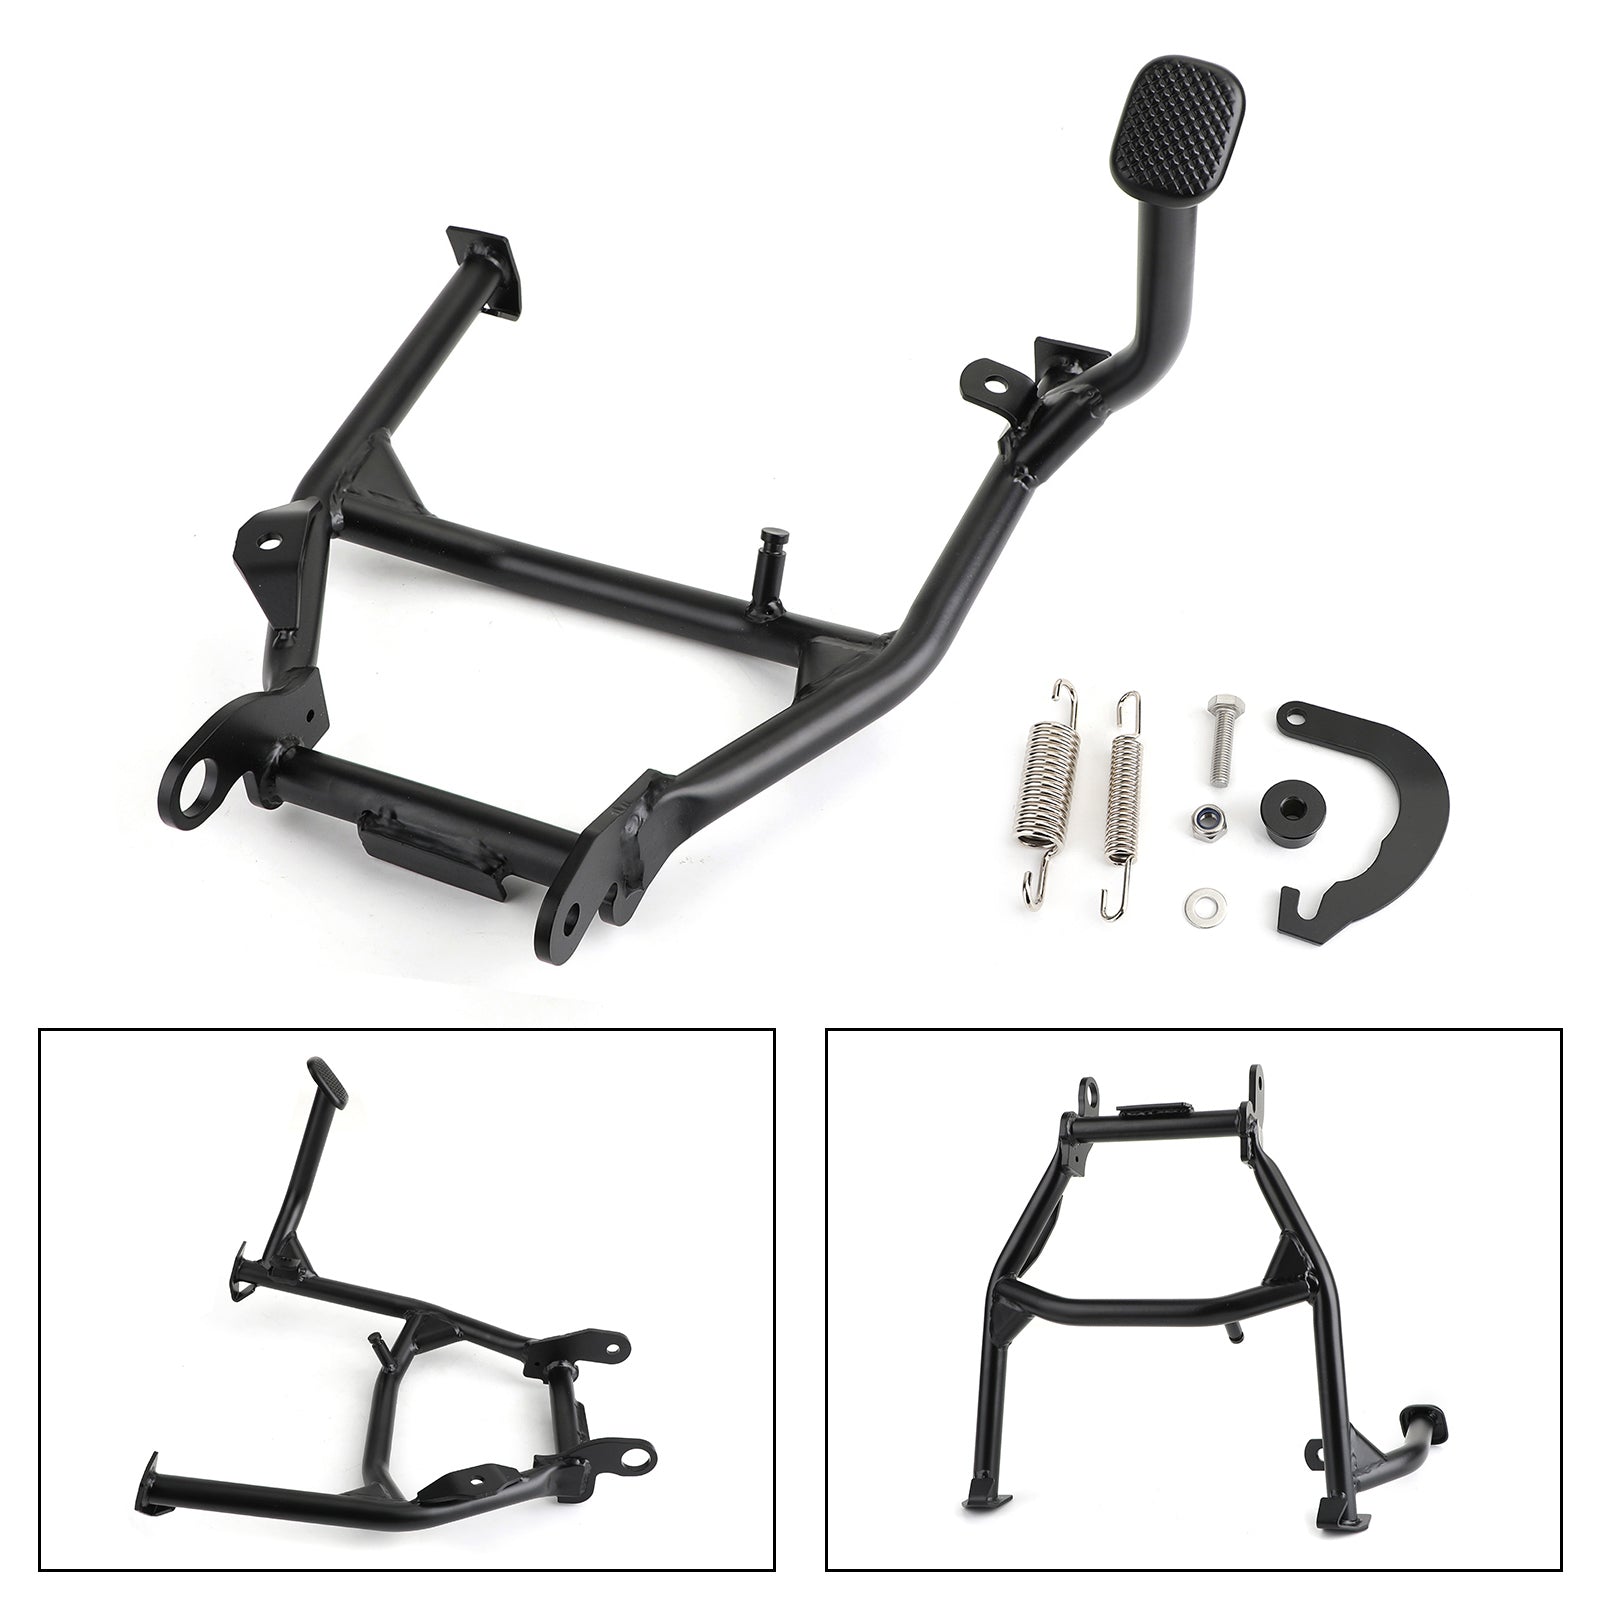 2016-2019 Honda CRF1000L Motorcycle Center Stand